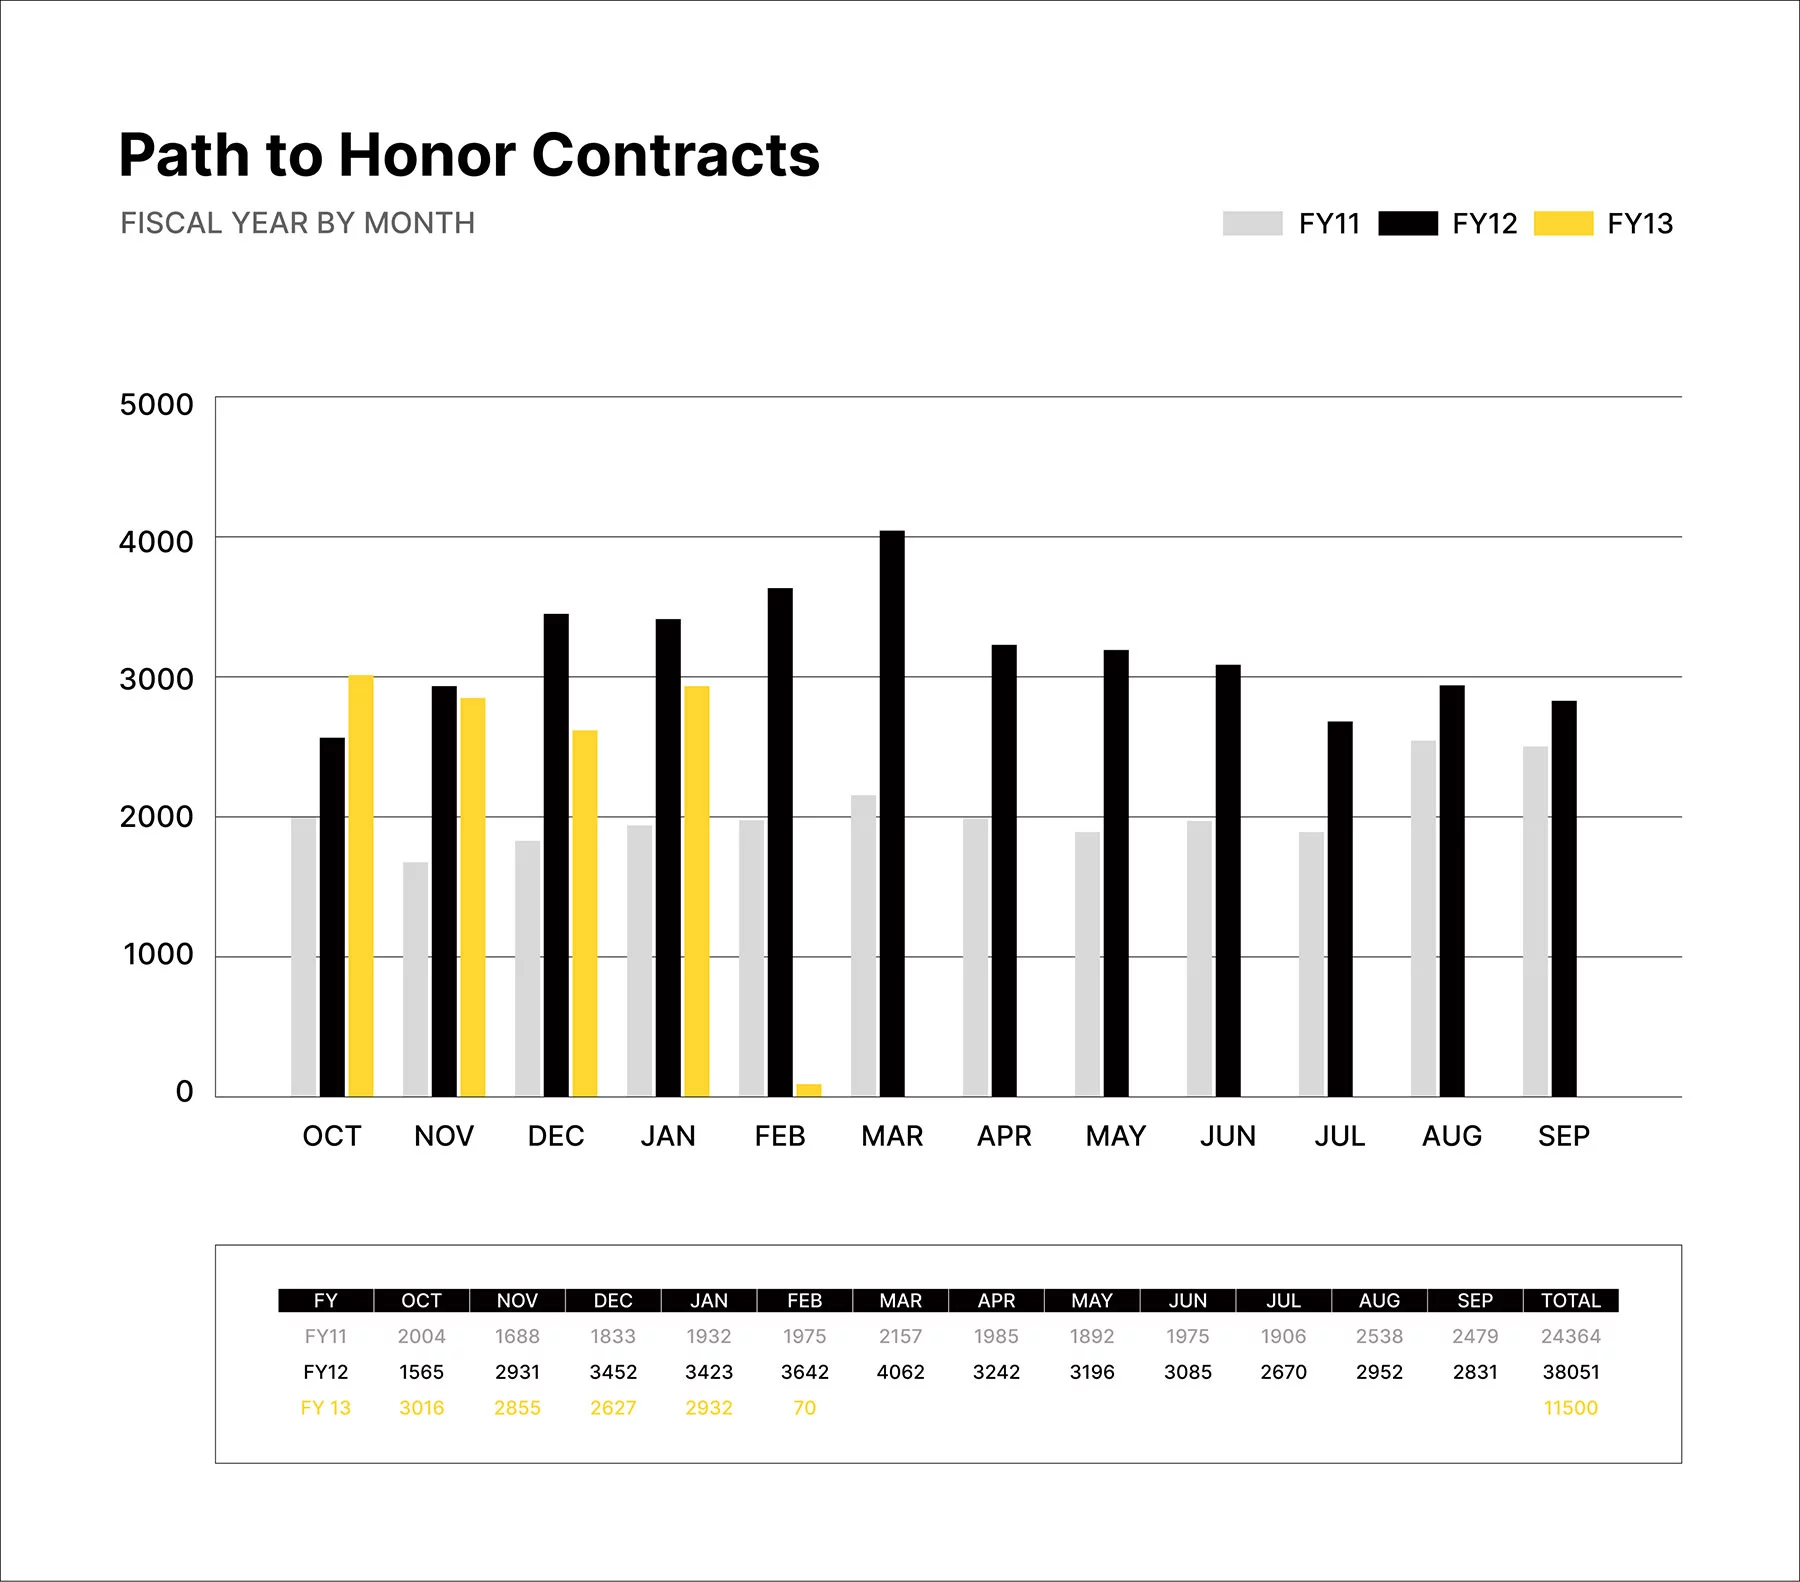 Bar chart of Path to Honor contracts for fiscal years 11-13.